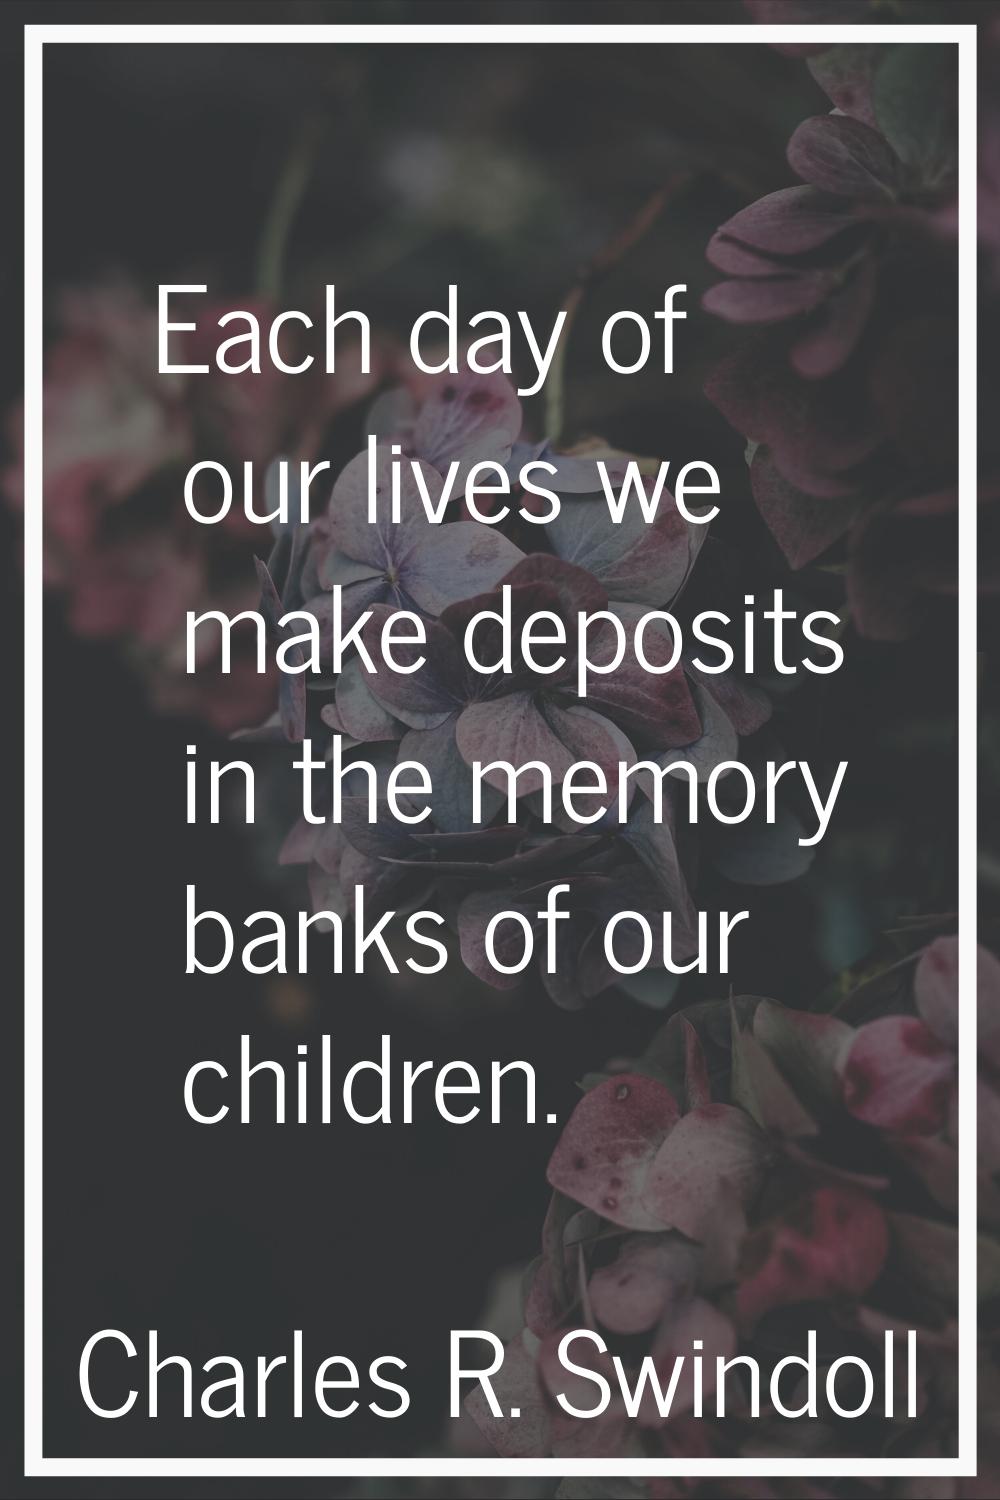 Each day of our lives we make deposits in the memory banks of our children.